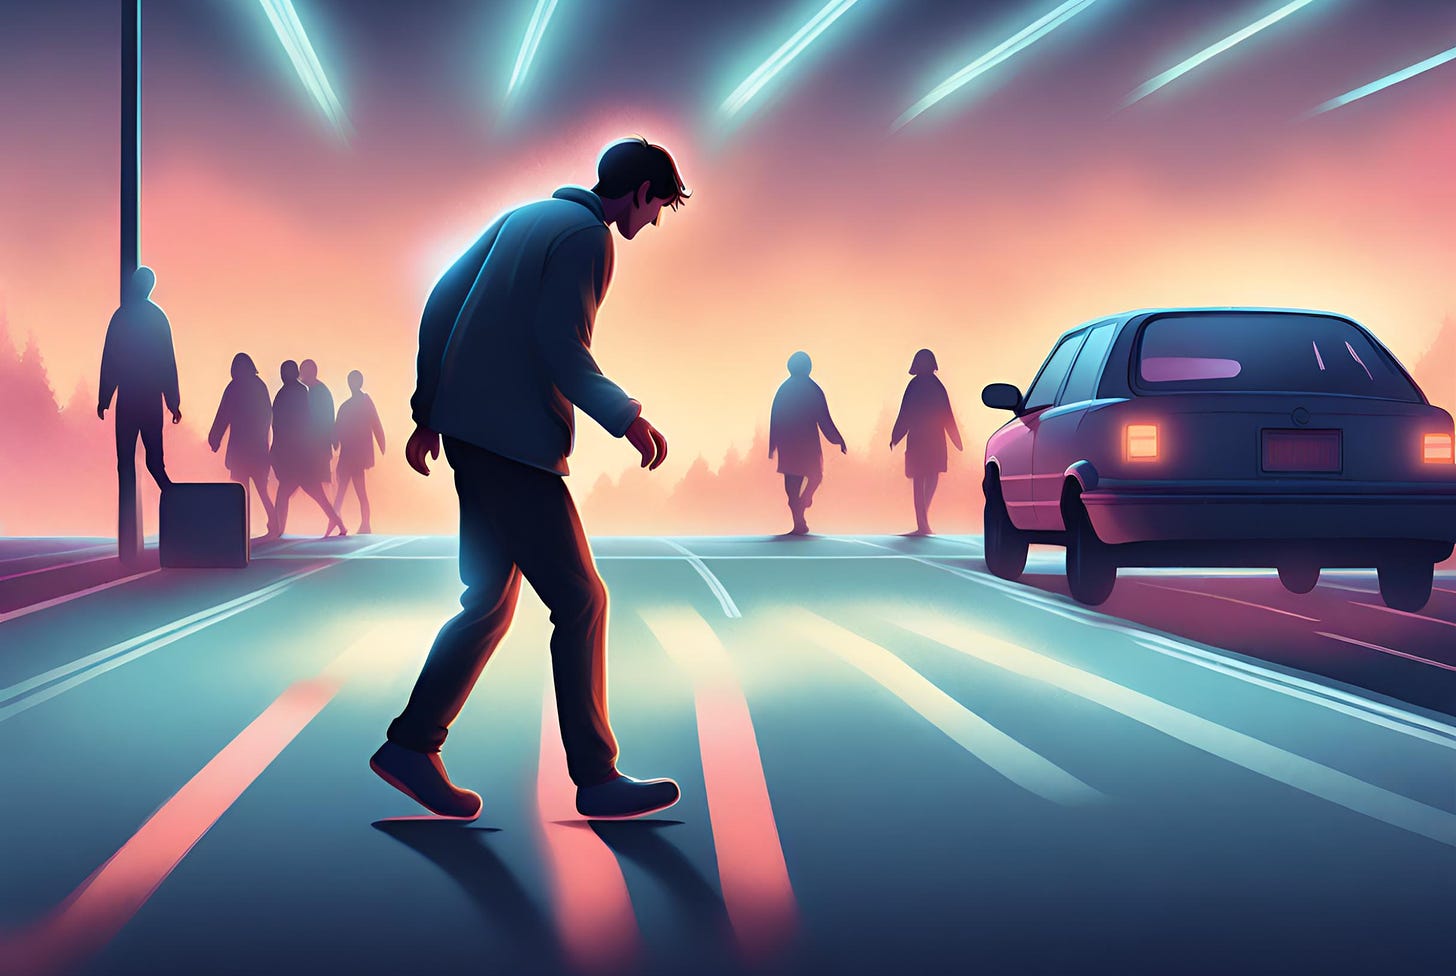 Illustration of a person walking in a parking lot